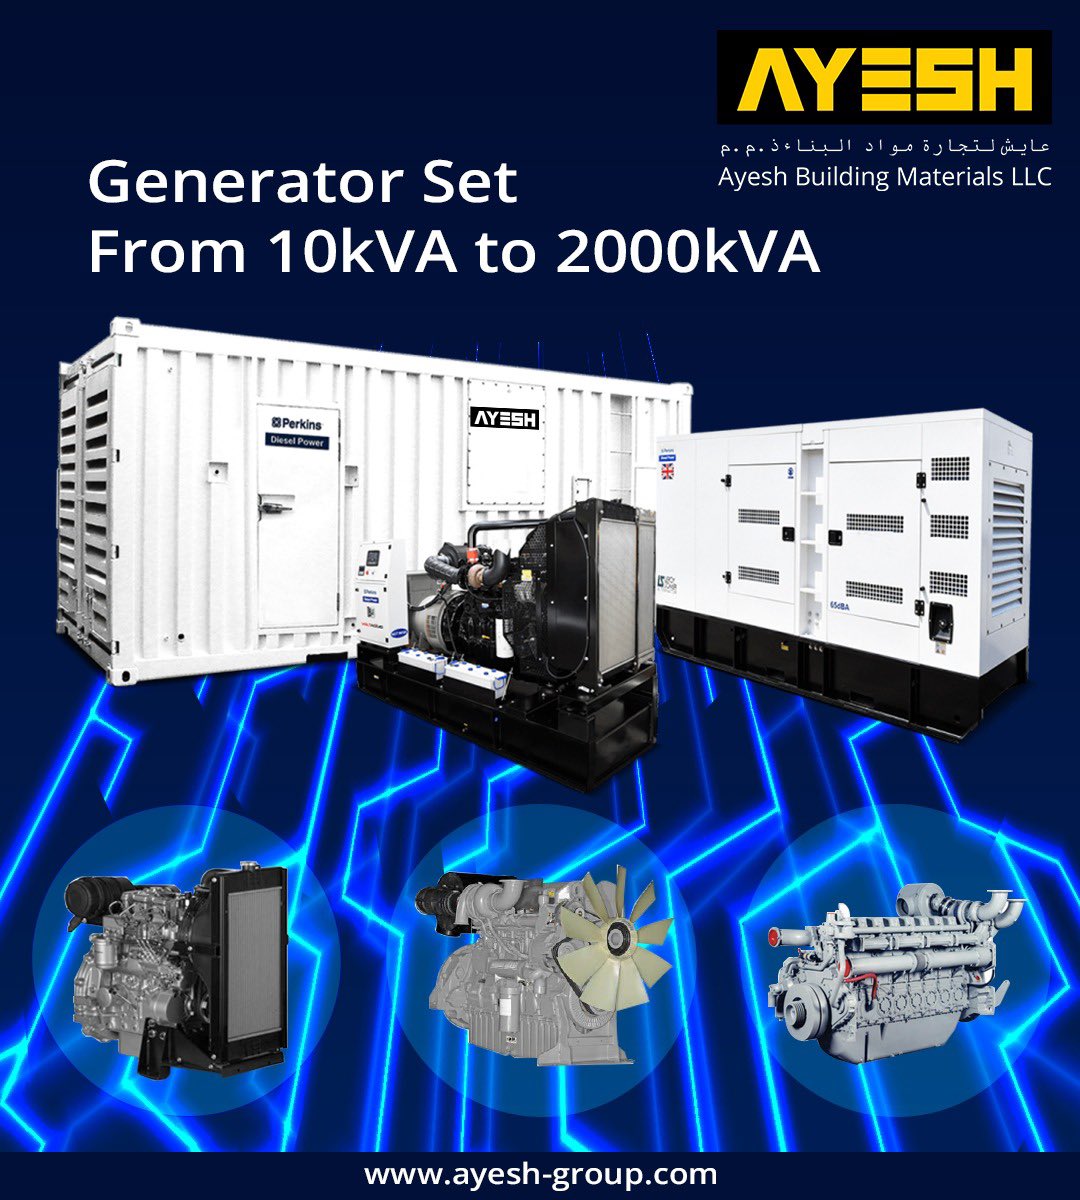 Delivers high level of efficiency and performance, ensuring a continuous supply of power without interruptions. 
#Perkins #PerkinsDieselPower #PowerGenerators #PowerGeneration #PowerSolutions #ReliablePowerSolutions #DieselGenerators #GenSets #Expo2020